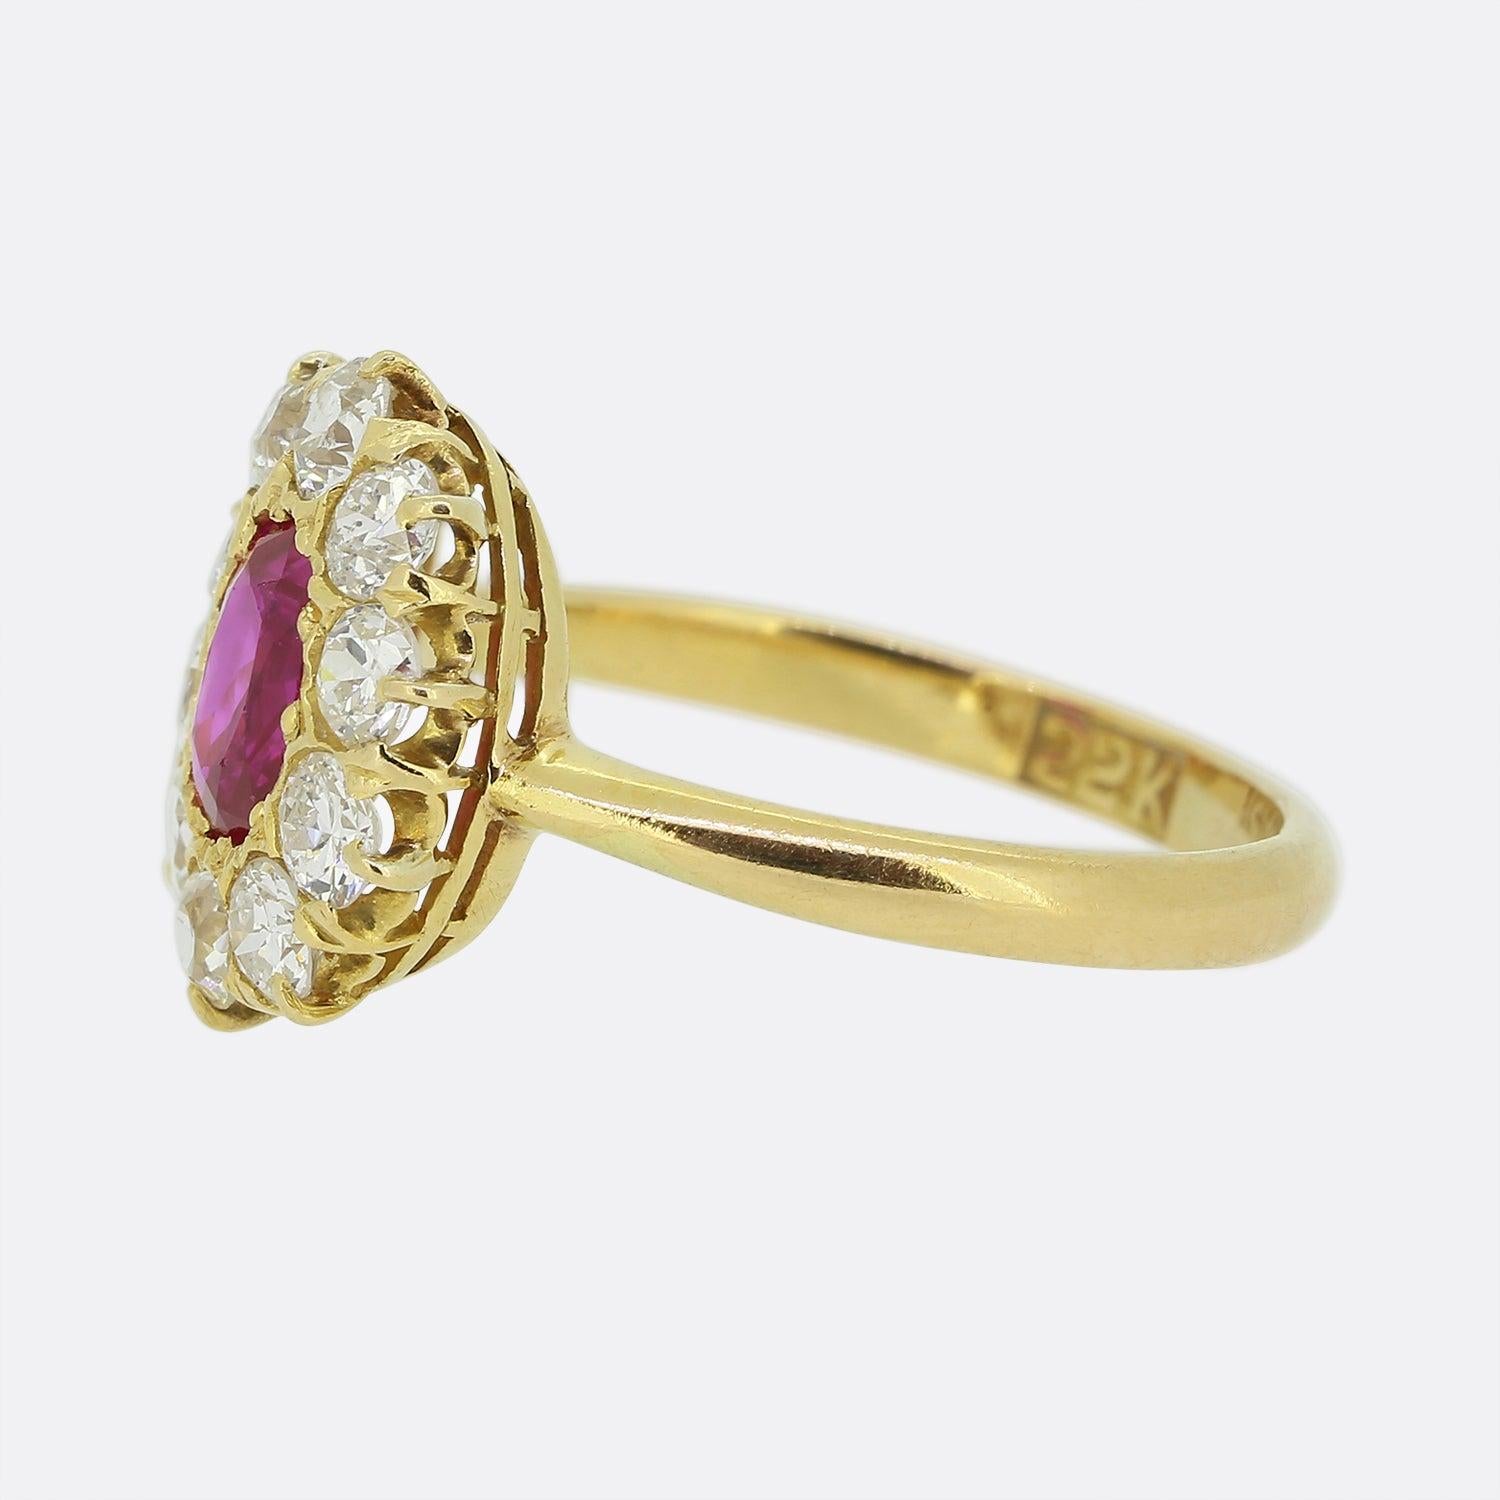 Here we have a fabulous ruby and diamond cluster ring. This vintage piece showcases a single oval shaped natural Burmese ruby at the centre which possesses a vivid red colour with a slight pinky undertone. This vibrant principle stone is then